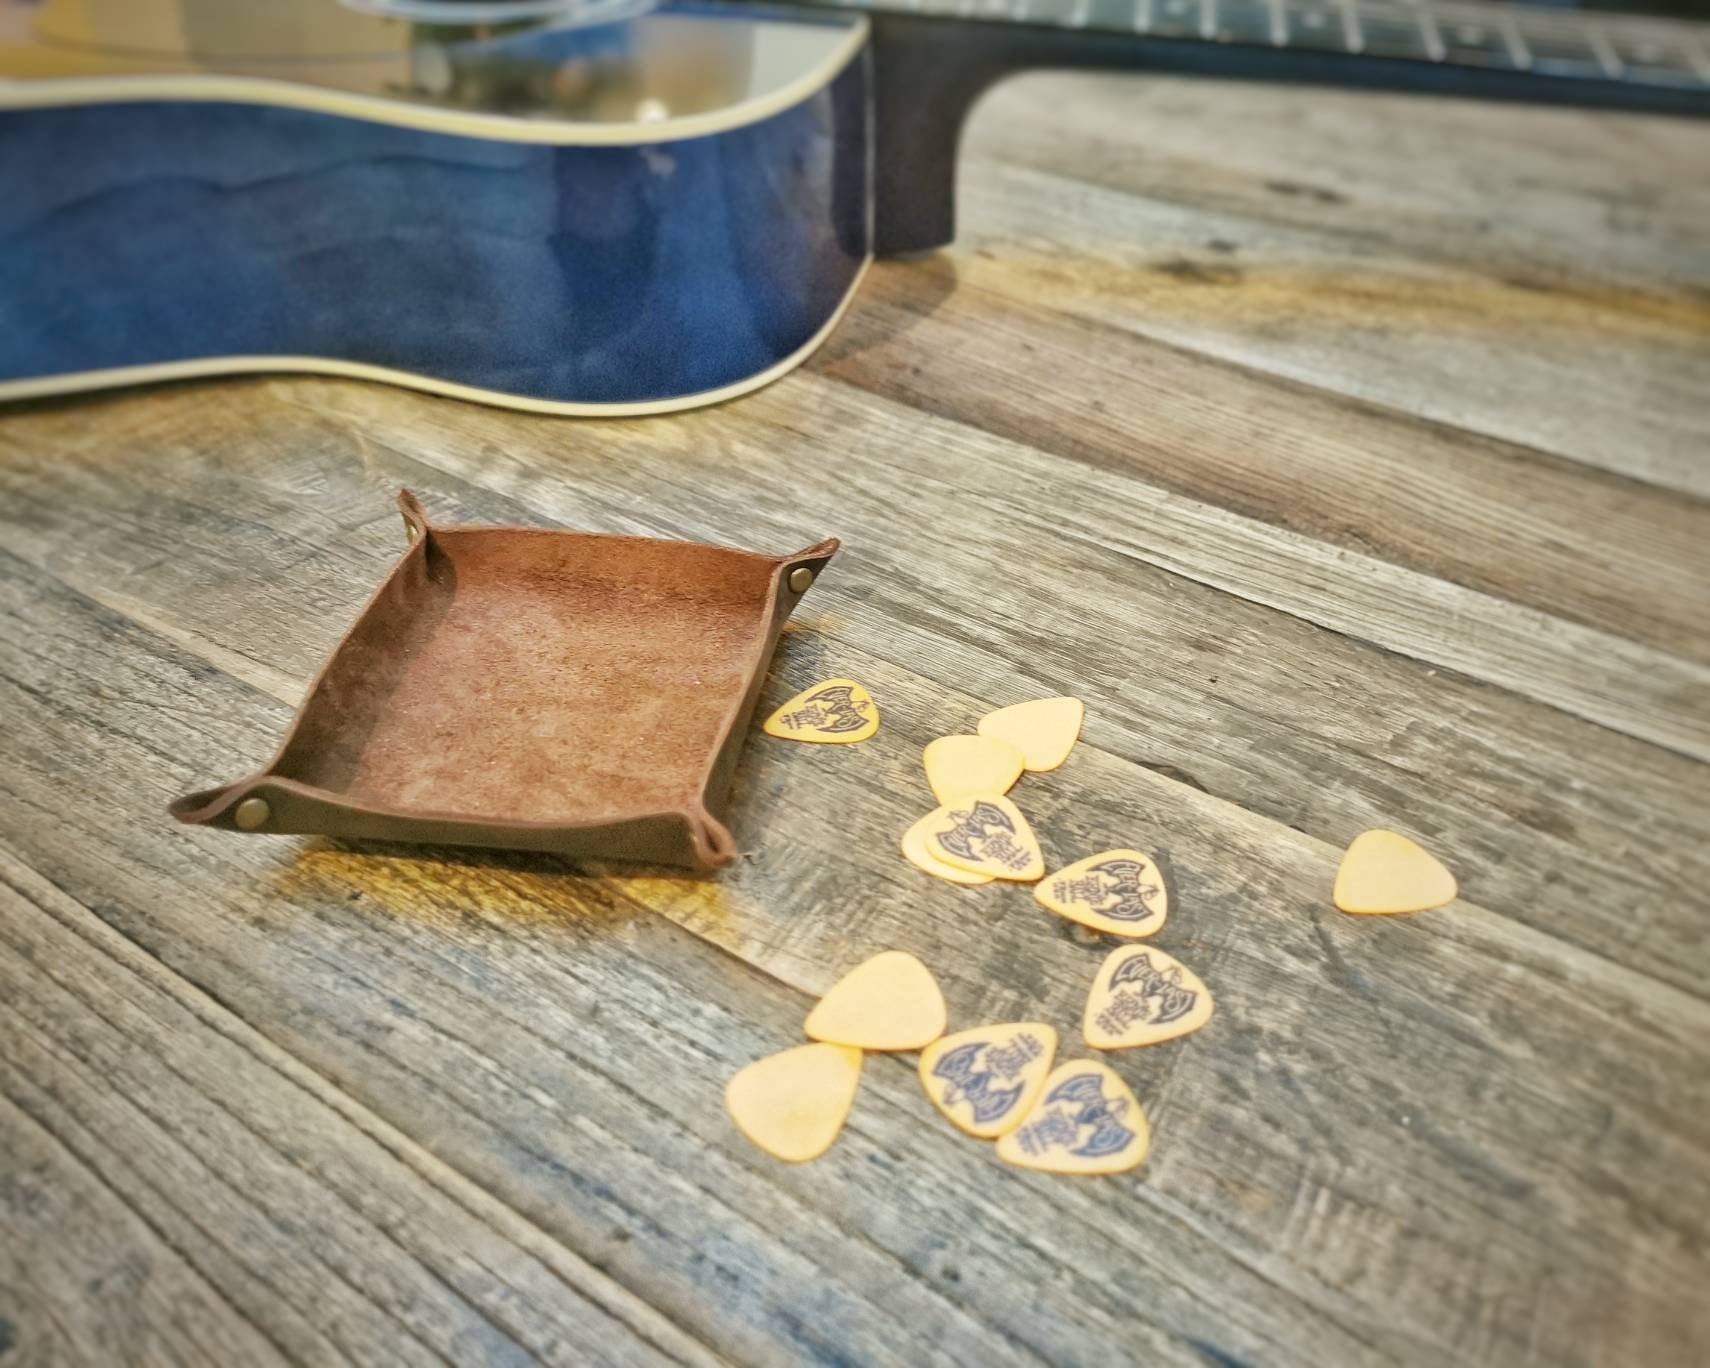 Real Leather Guitar Plectrum Holder, Guitar Pic Tray.